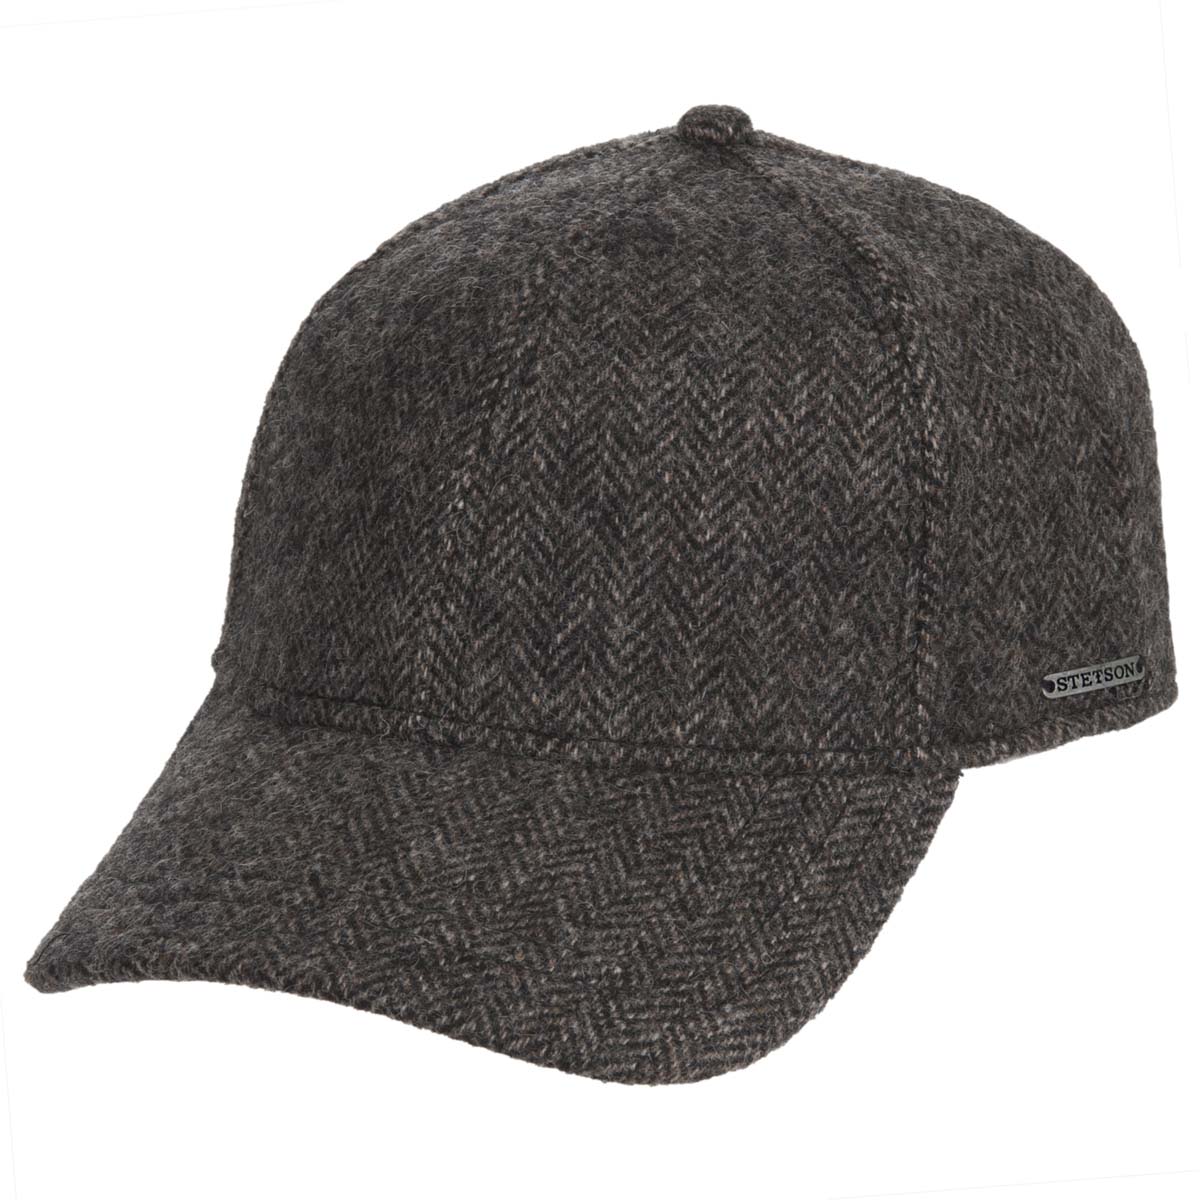 Baseball cap Plano Woolrich style by Stetson